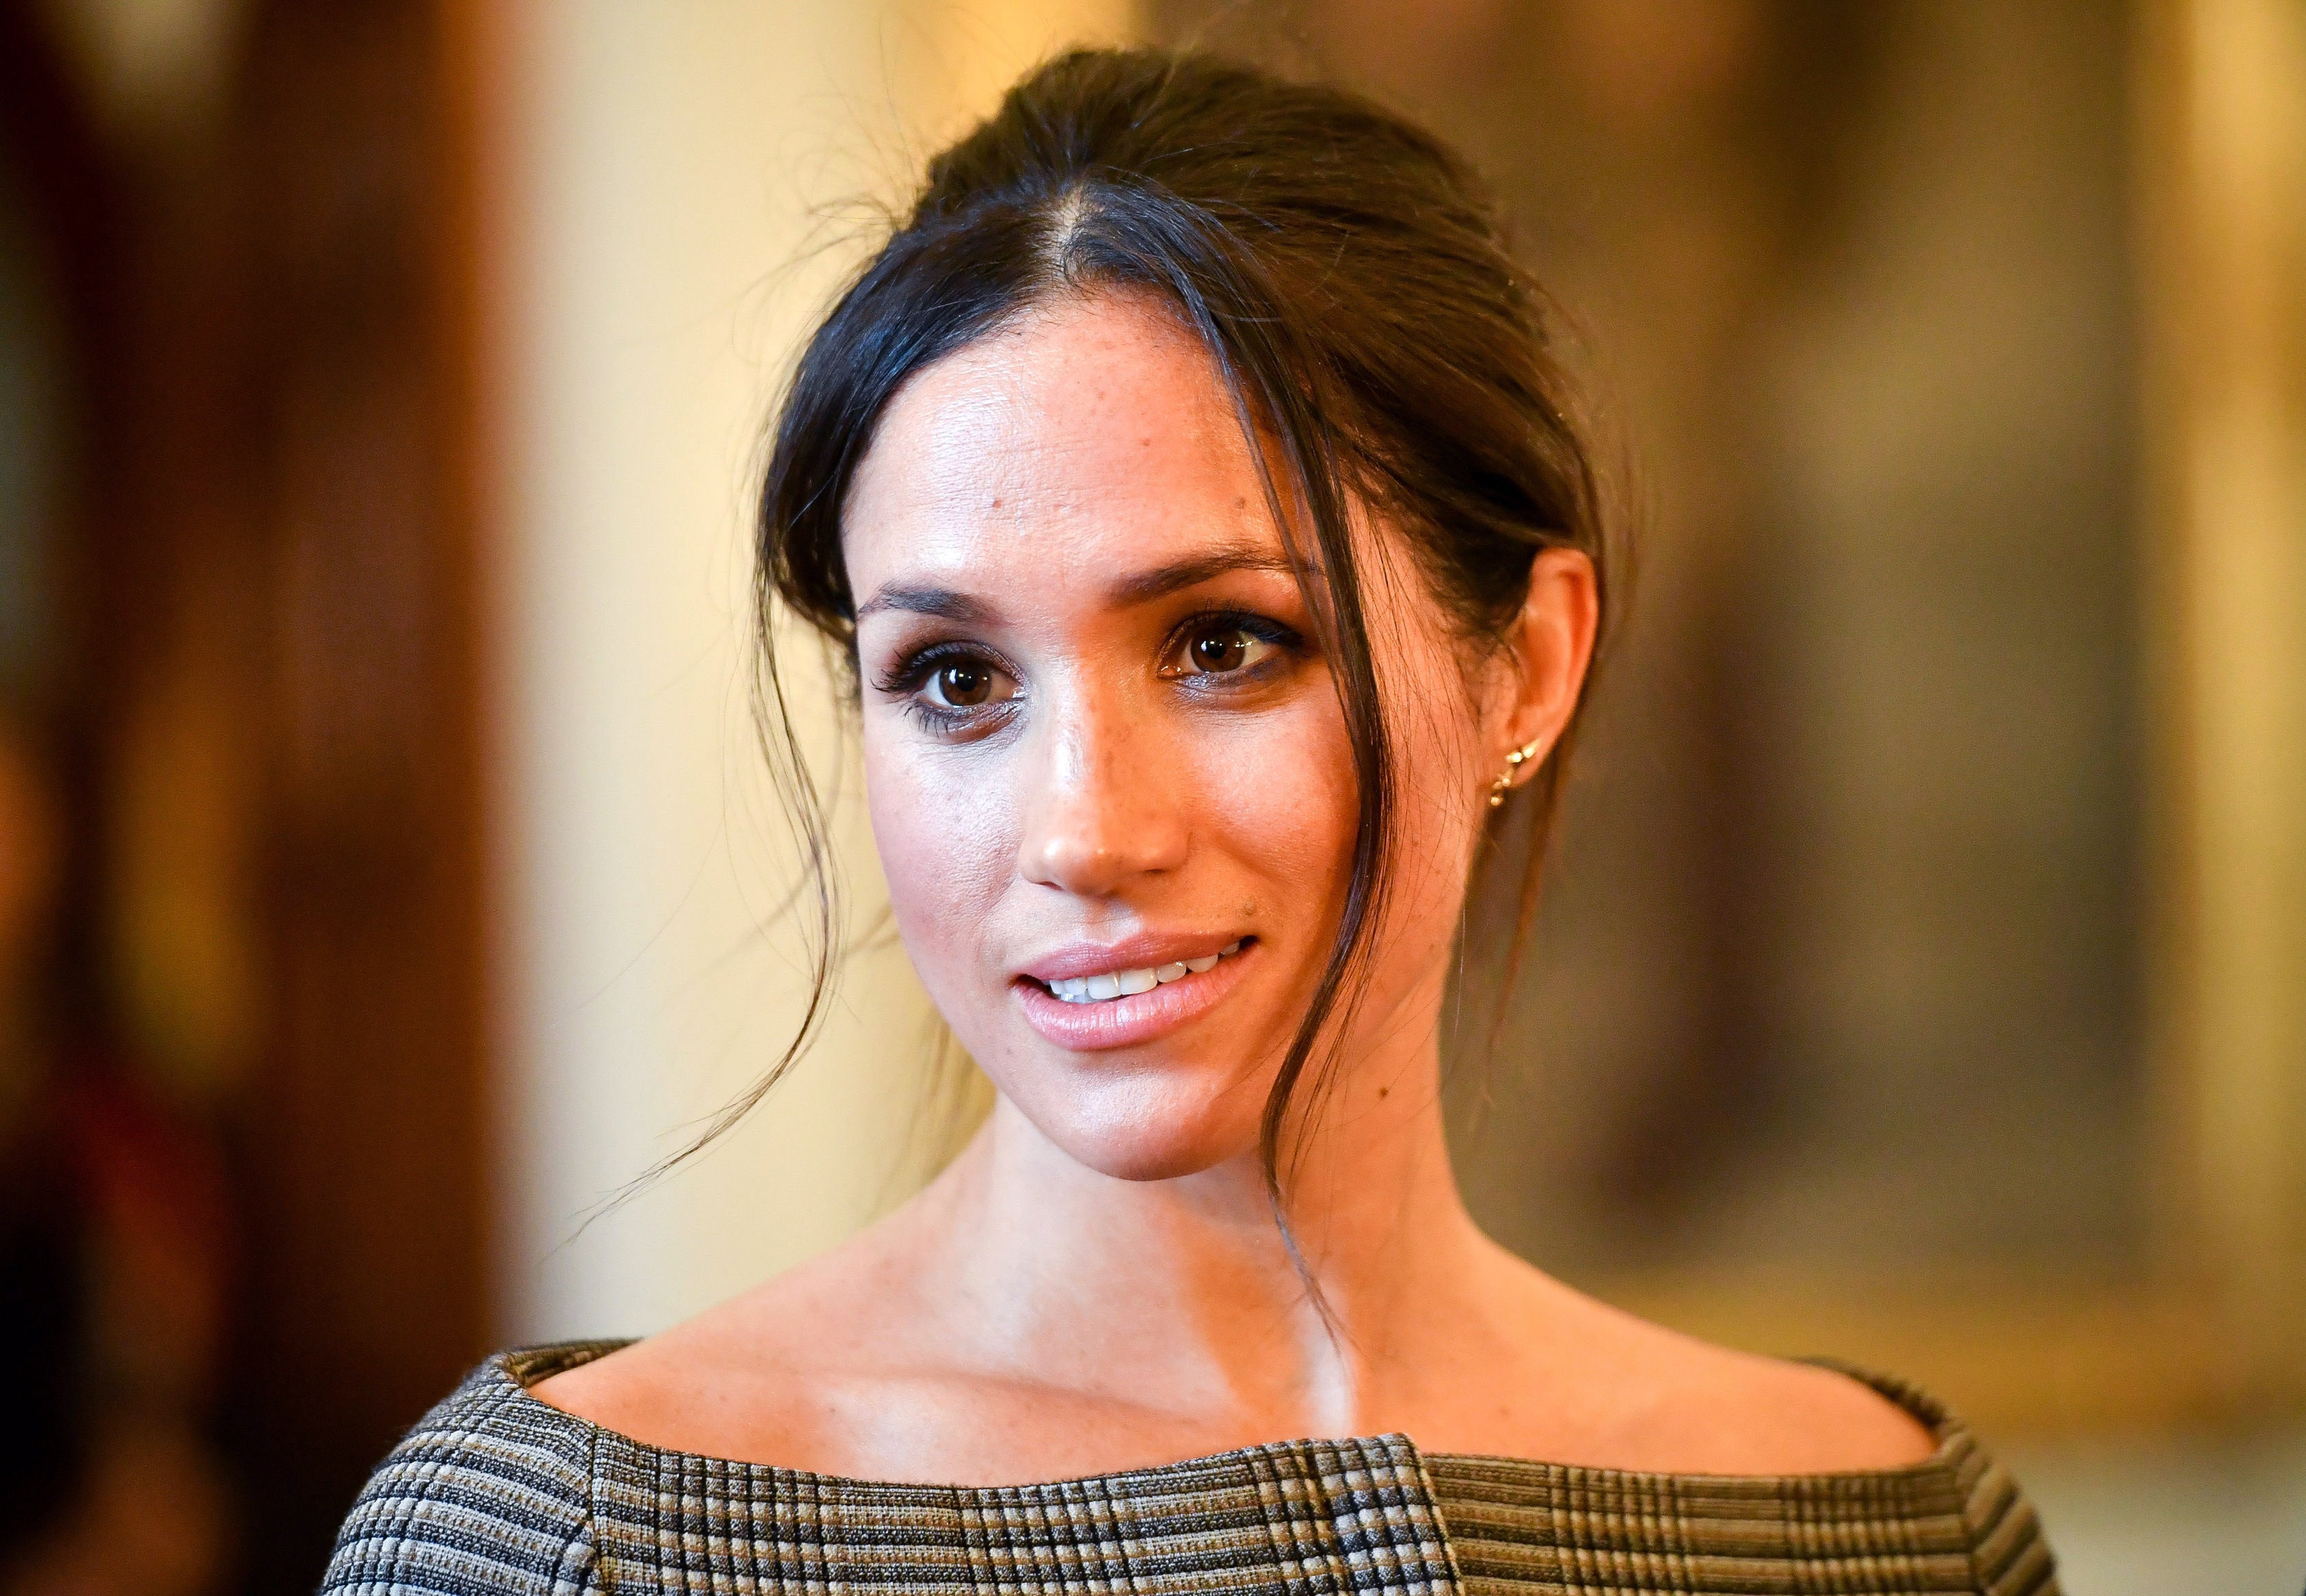 Russell Brand Boasts About ‘planting One On Meghan Markle In Resurfaced Video